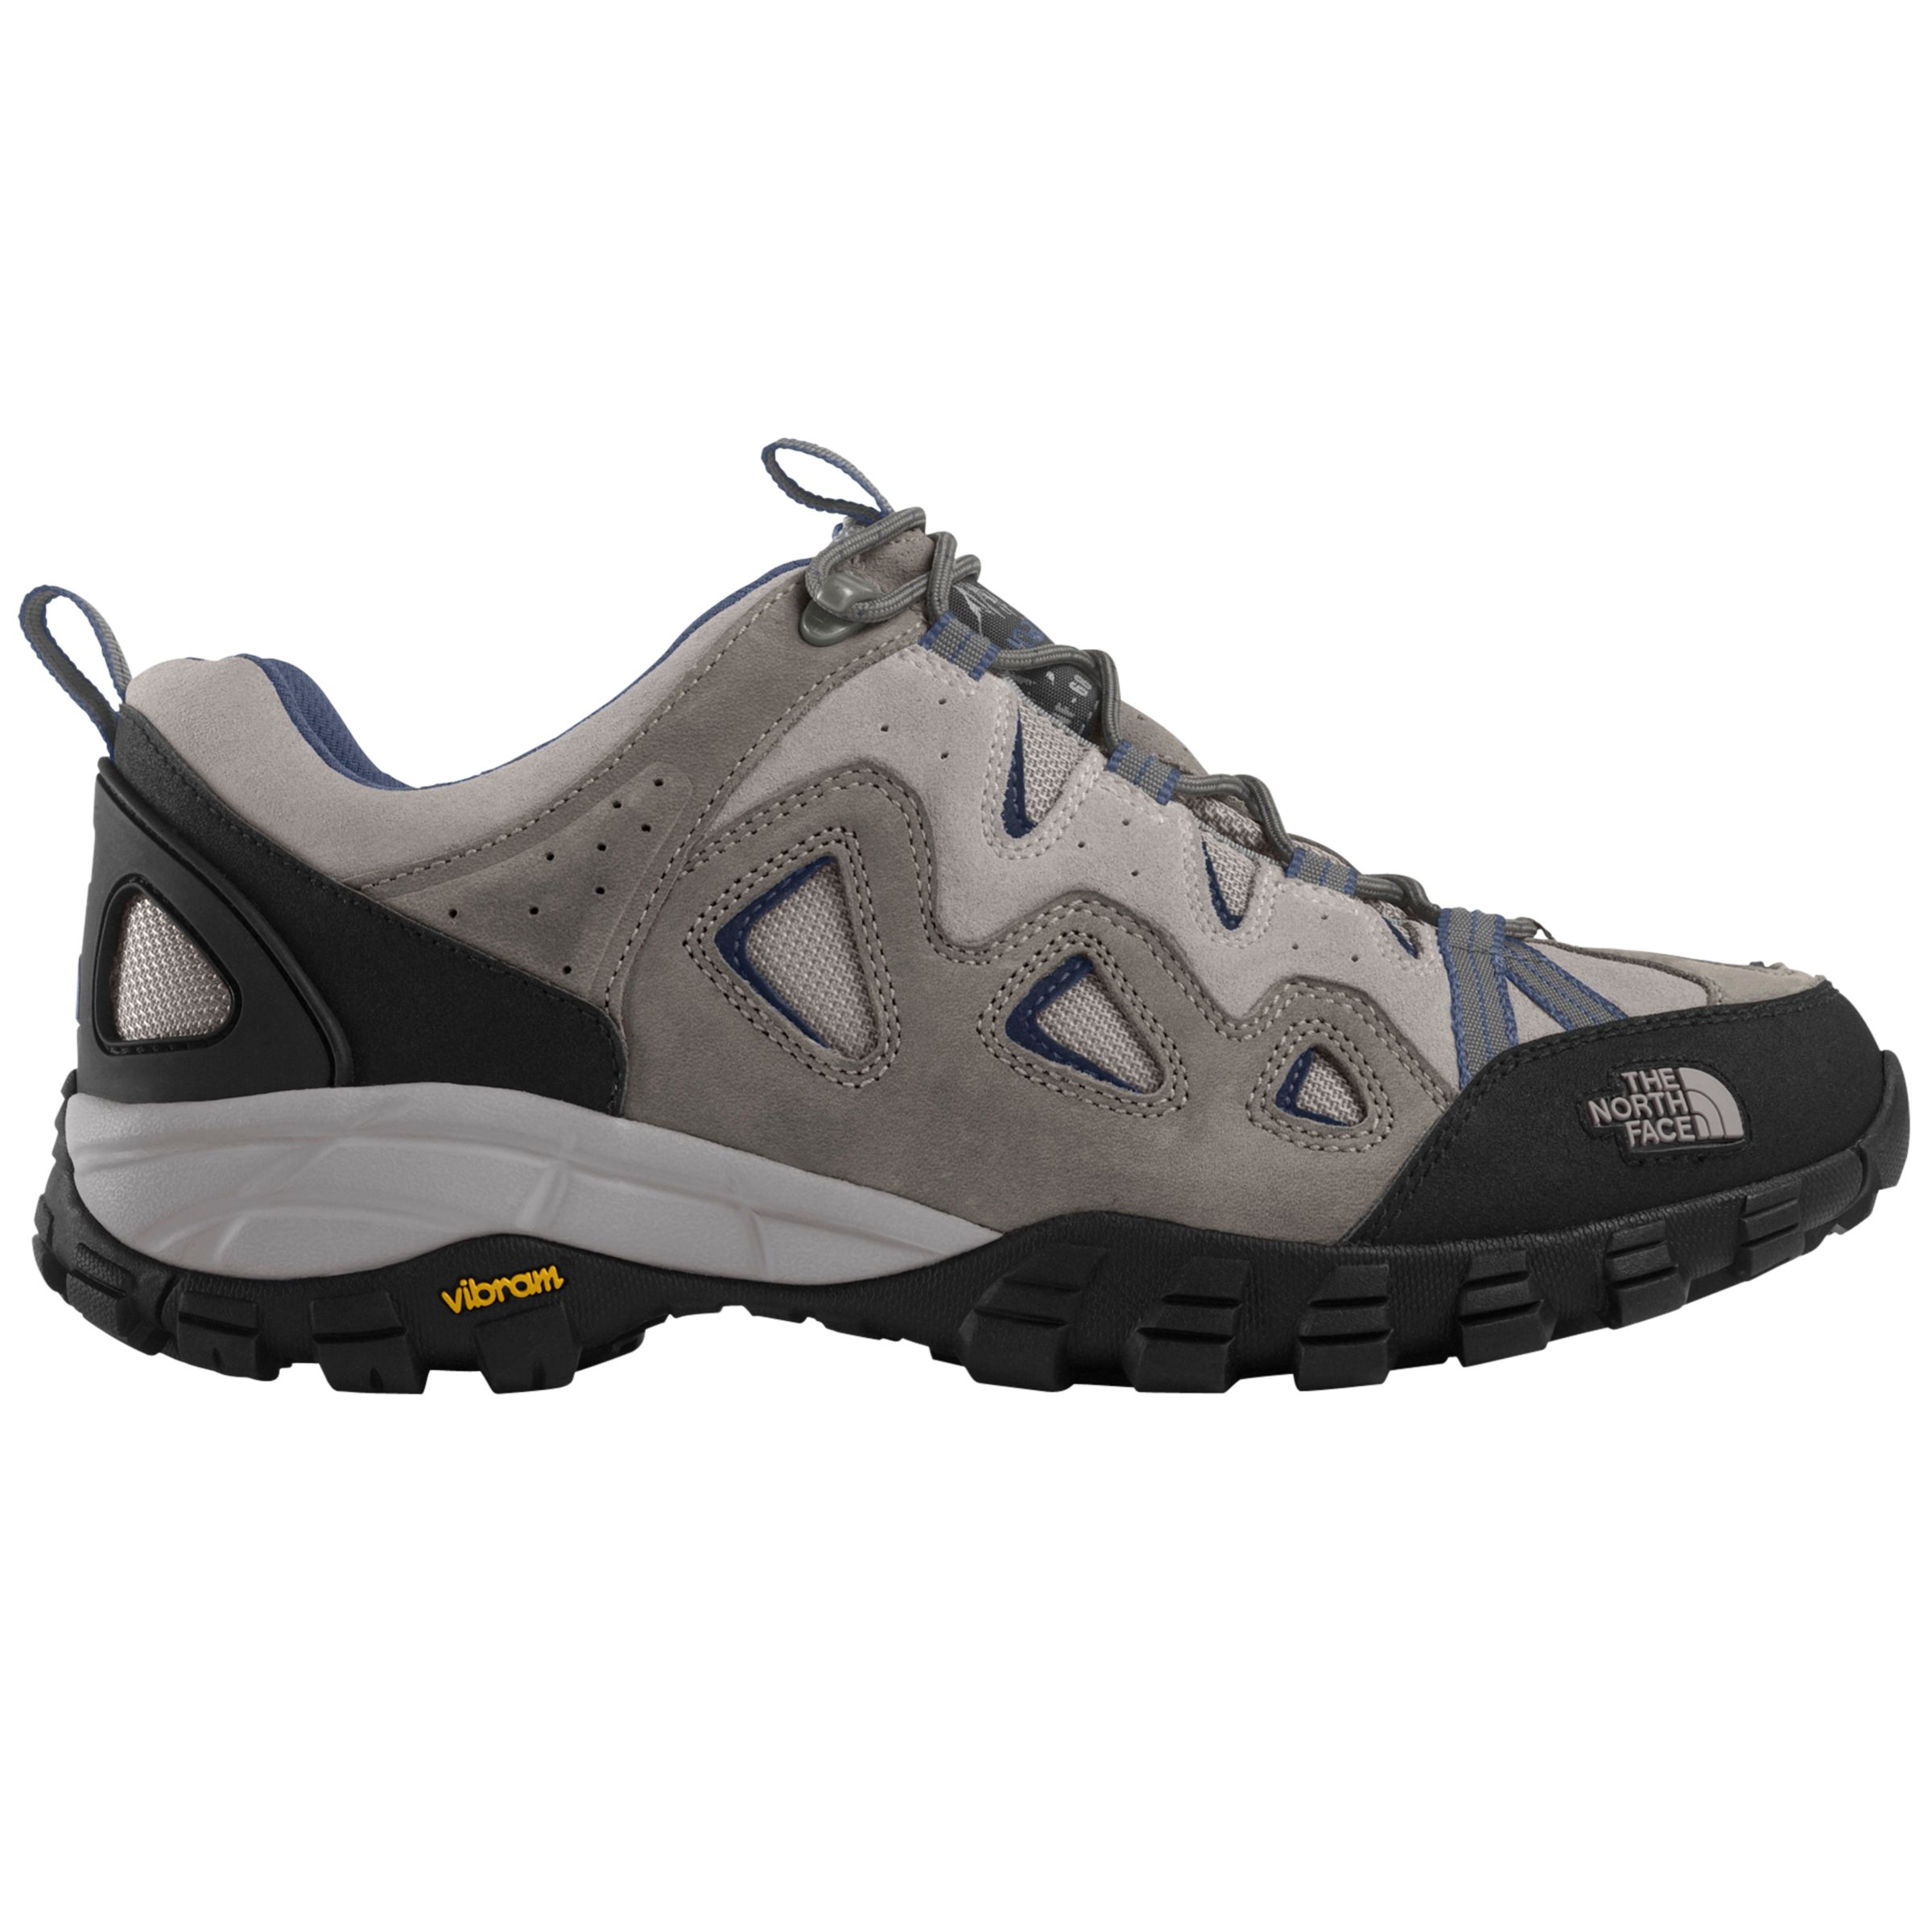 The North Face Activity Shoe, Grey/Blue, 8